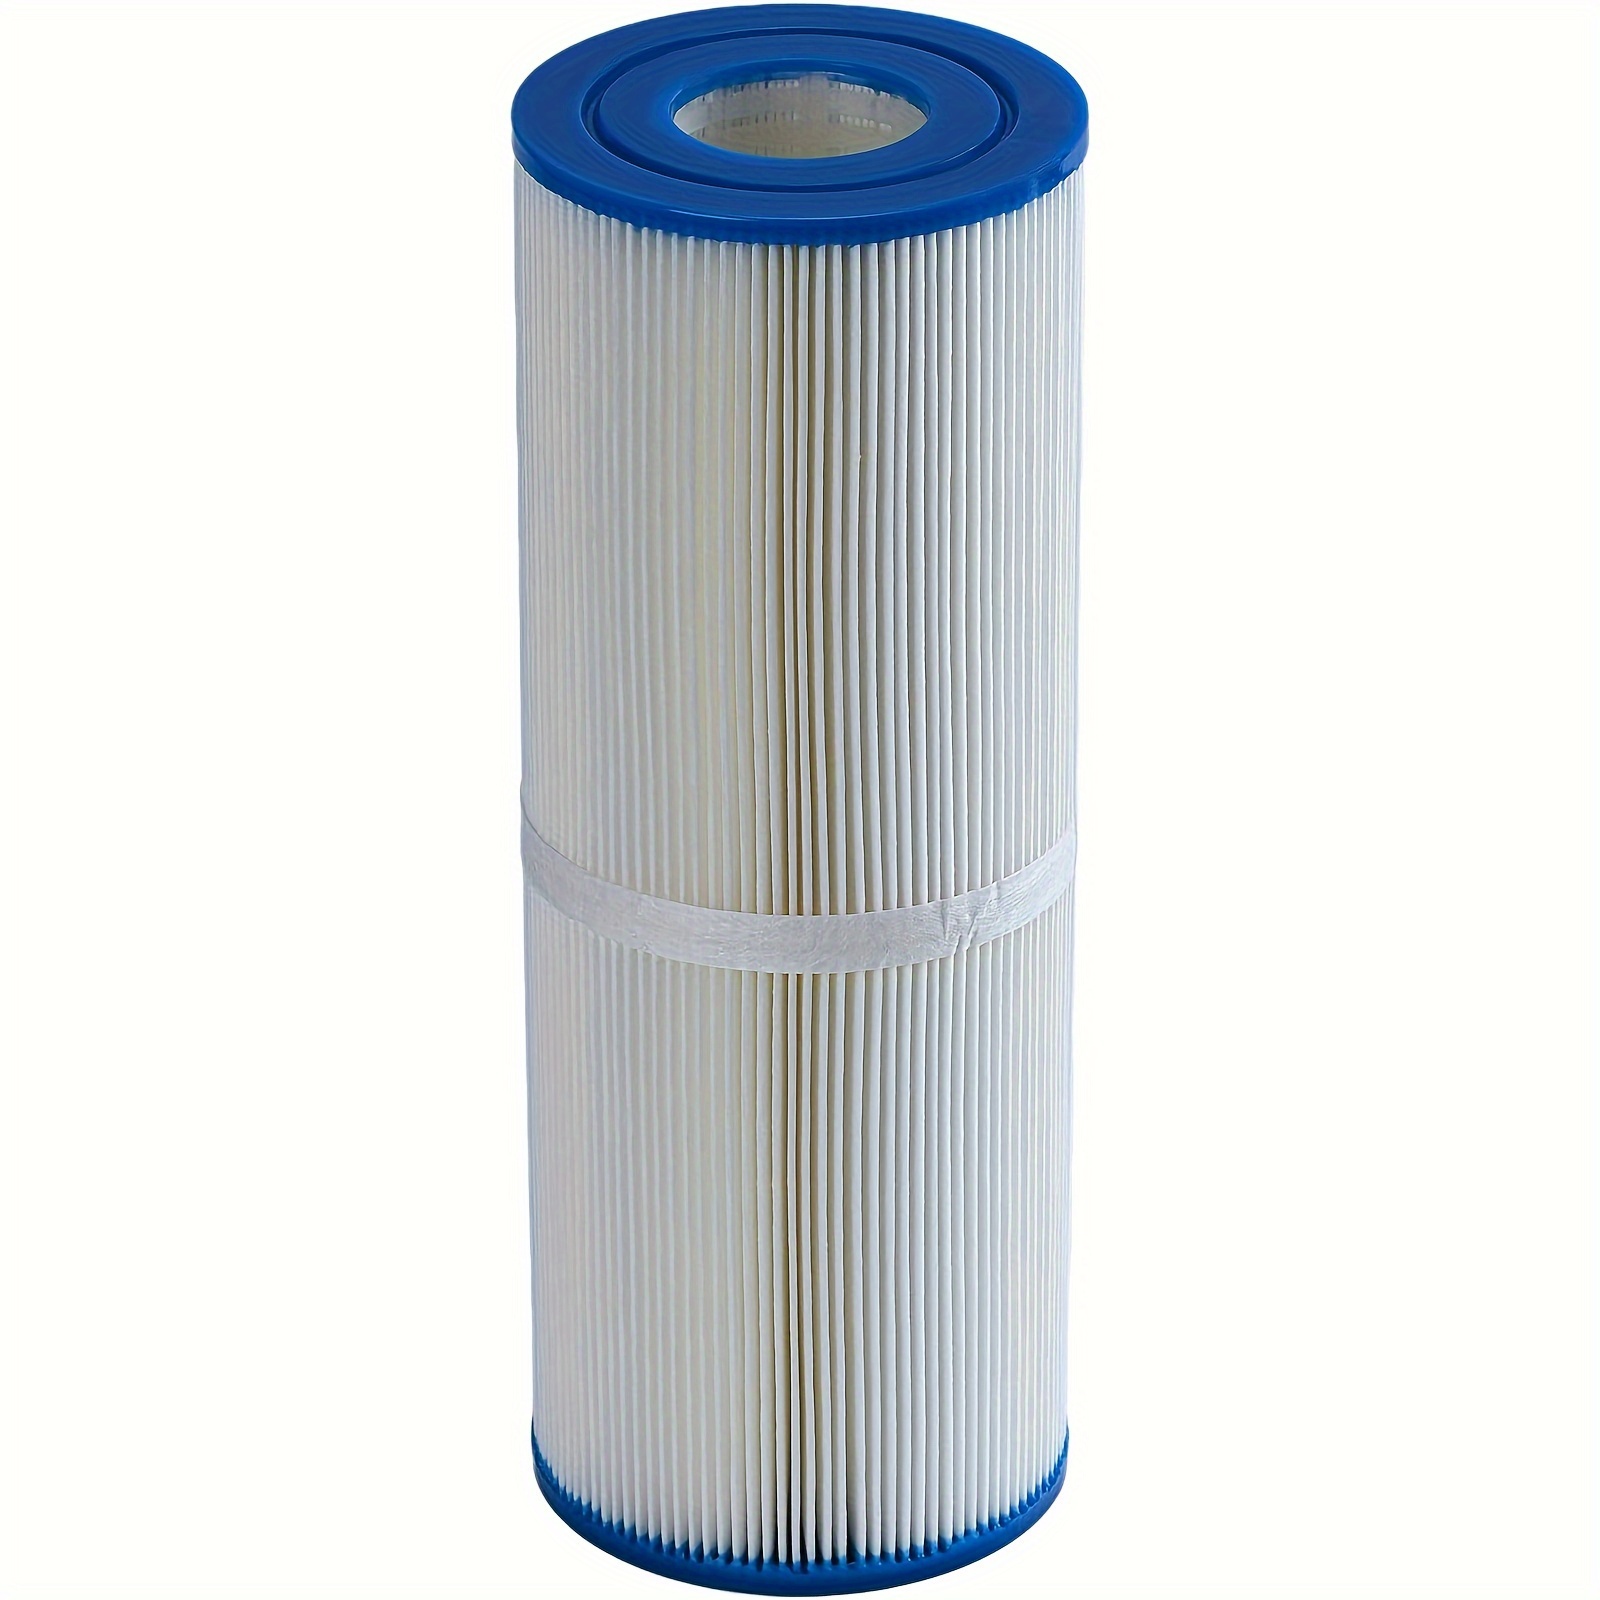 

2-piece High-efficiency Spa Filter Cartridges - Replacement For Prb25-in, C-4326, Fc-2375 - Perfect For Home Hot Tubs & Swim Spas